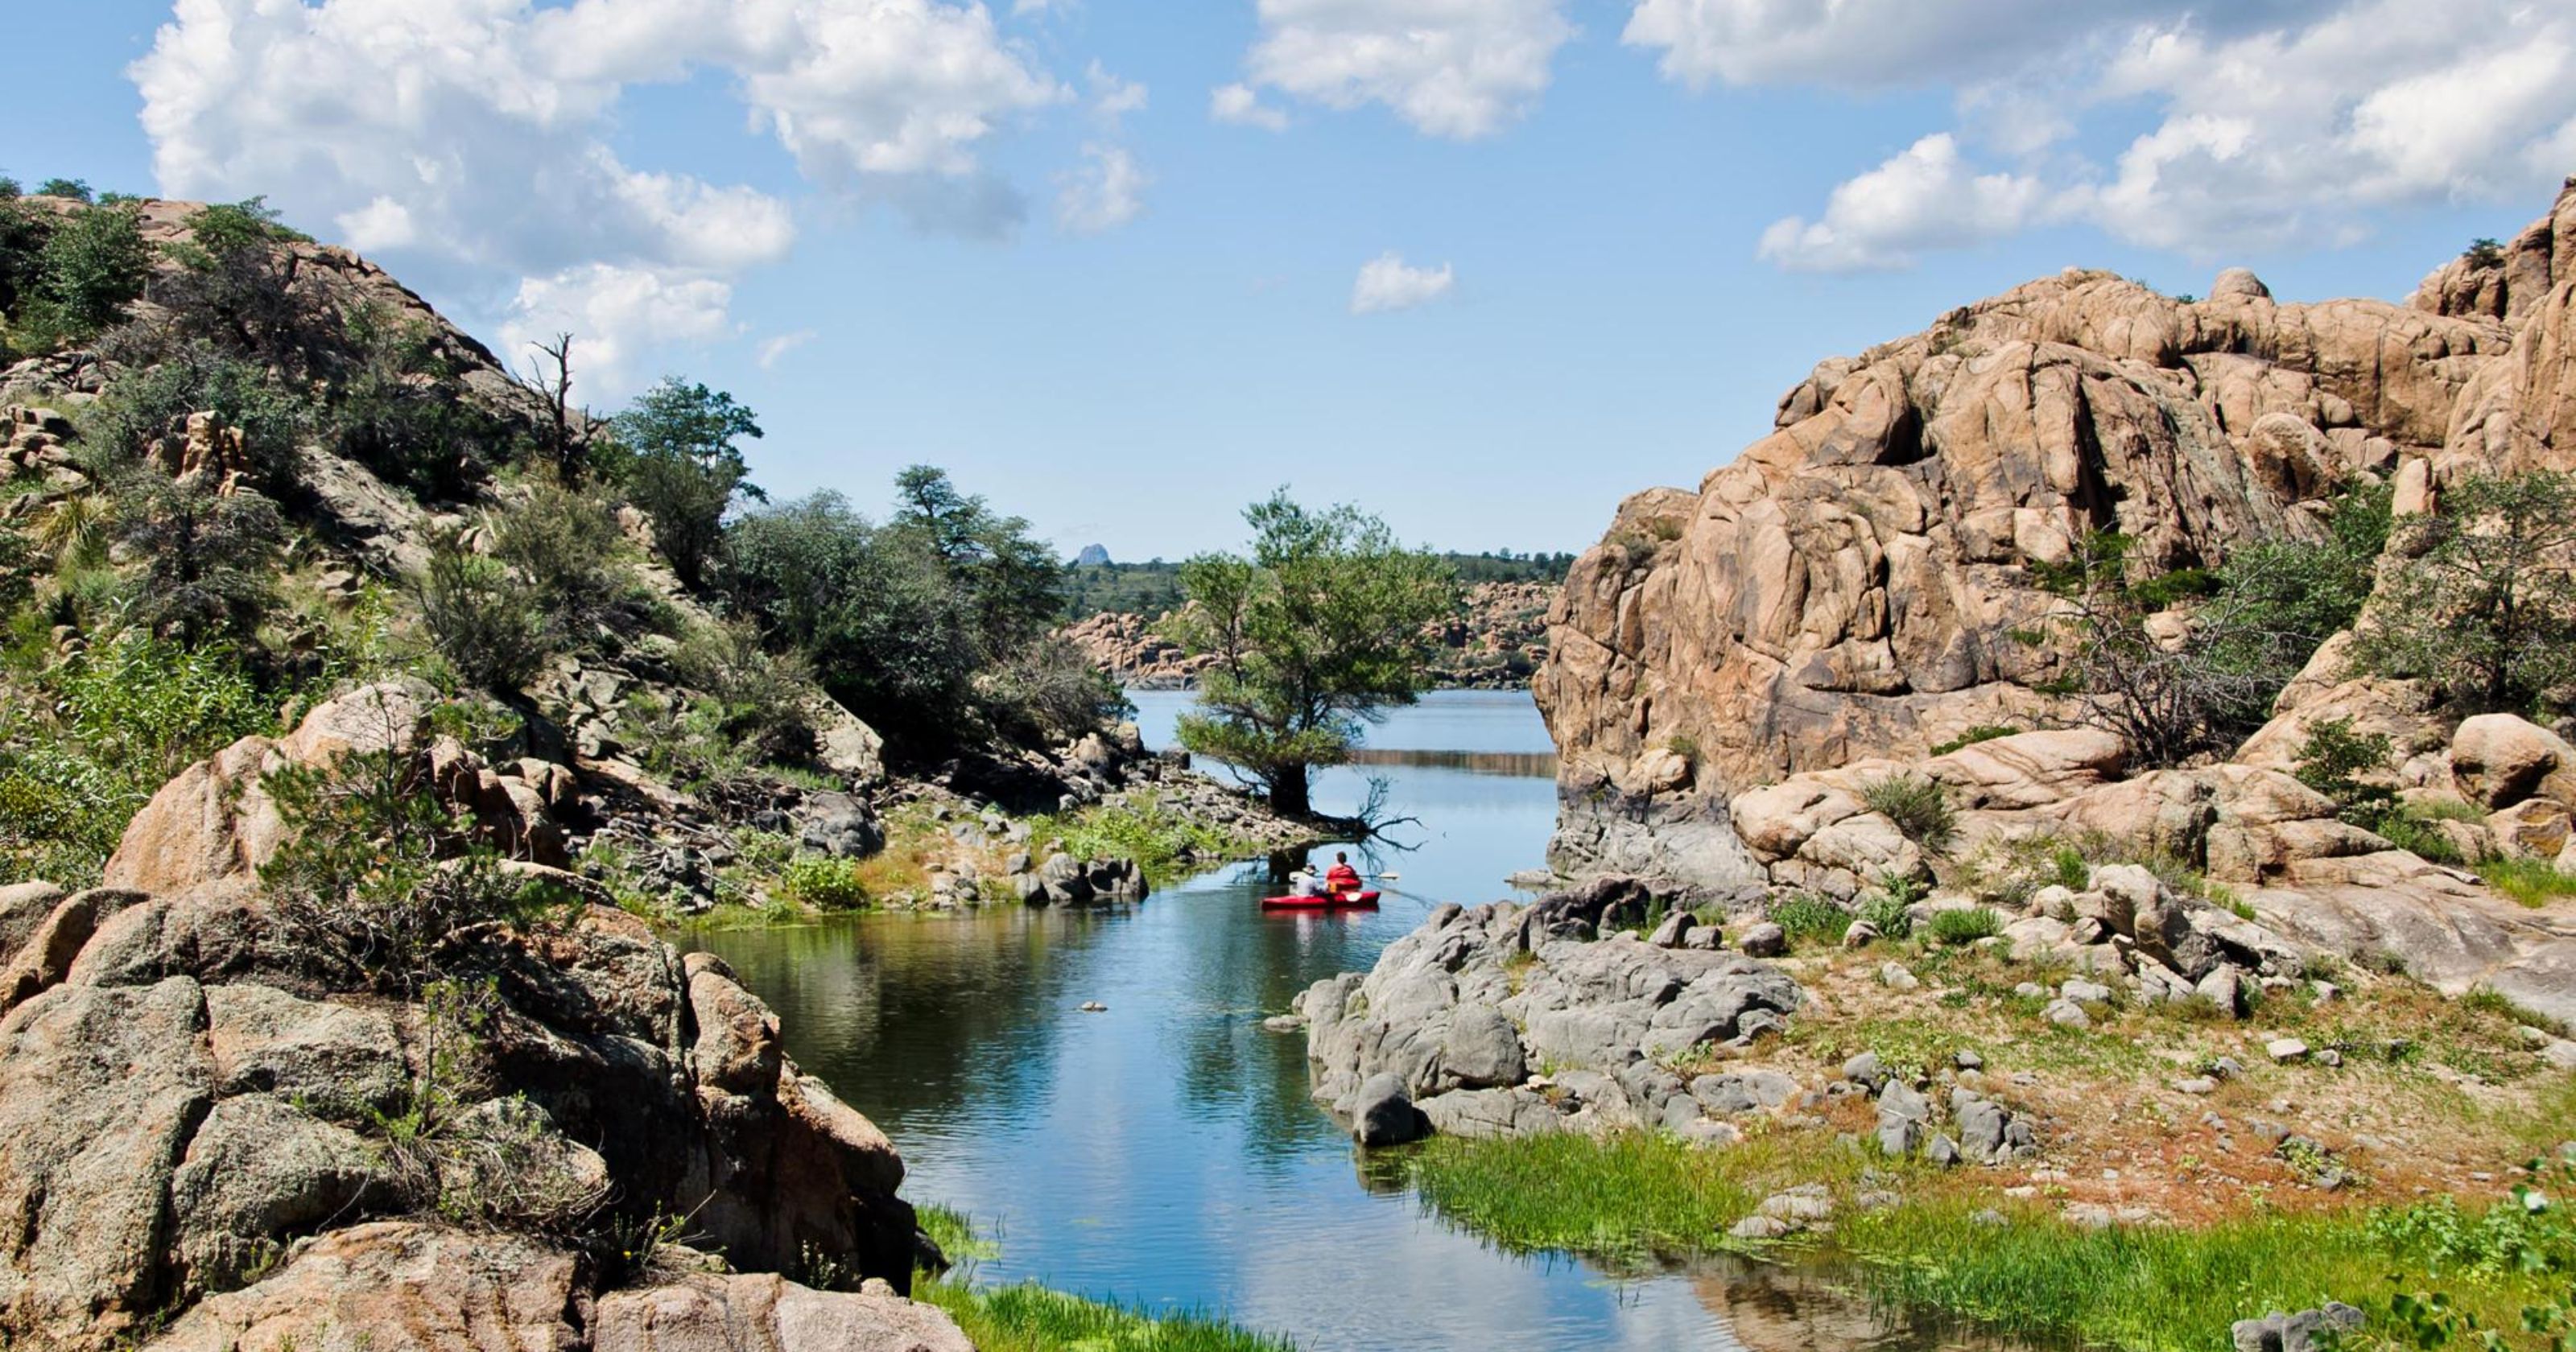 Cool off in these 10 Arizona lakes, streams, rivers